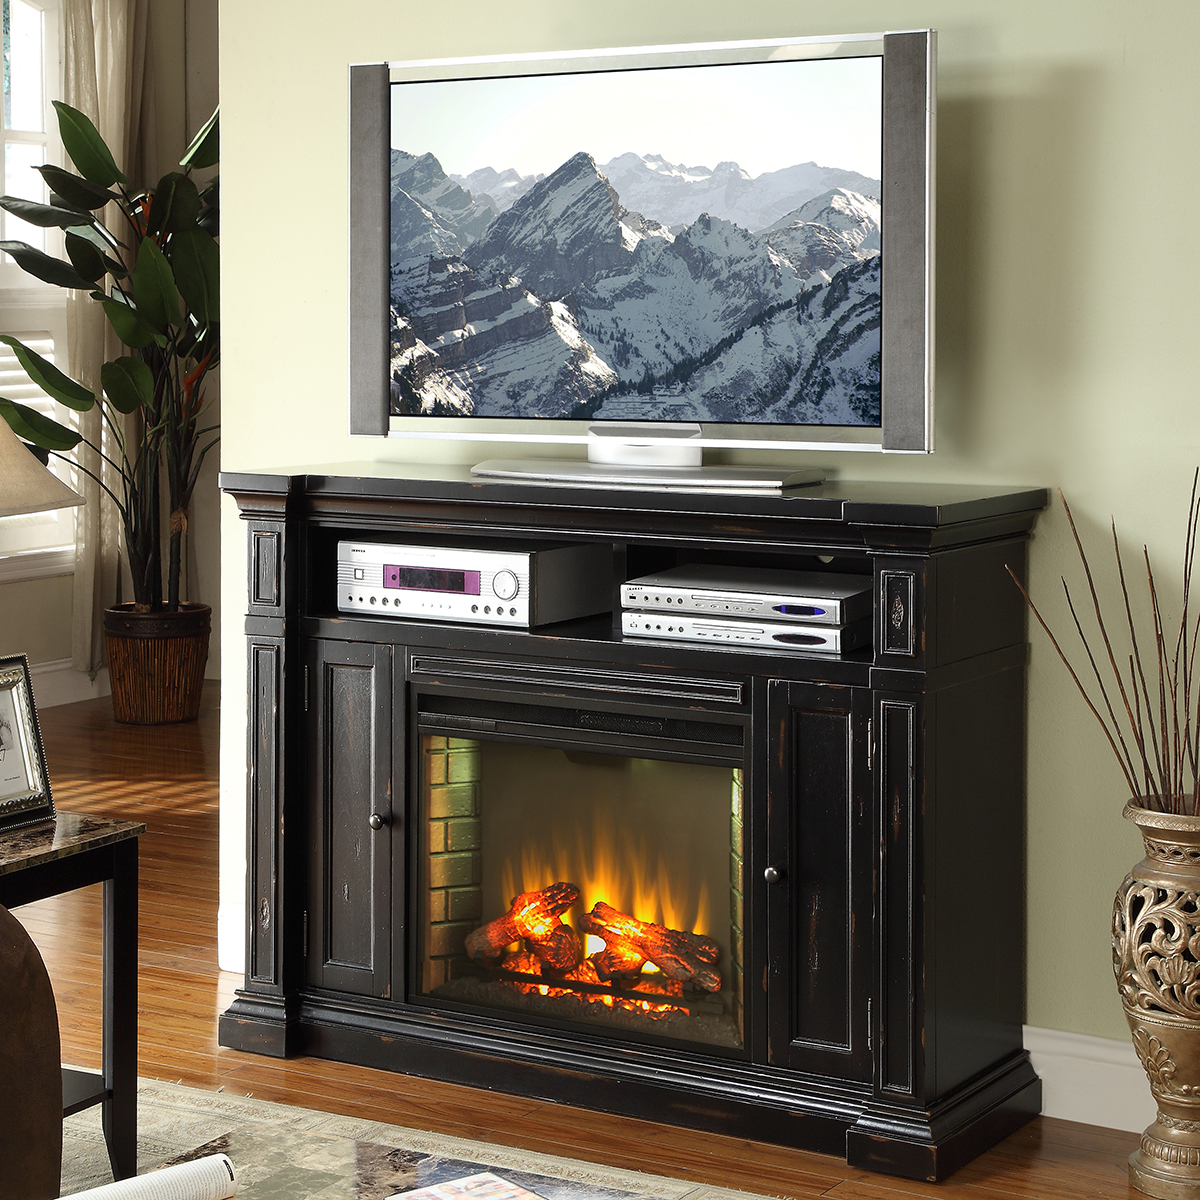 Tv On Fireplace Mantel Unique Manchester 58" Fireplace Media Center Tv Stand Mantel In